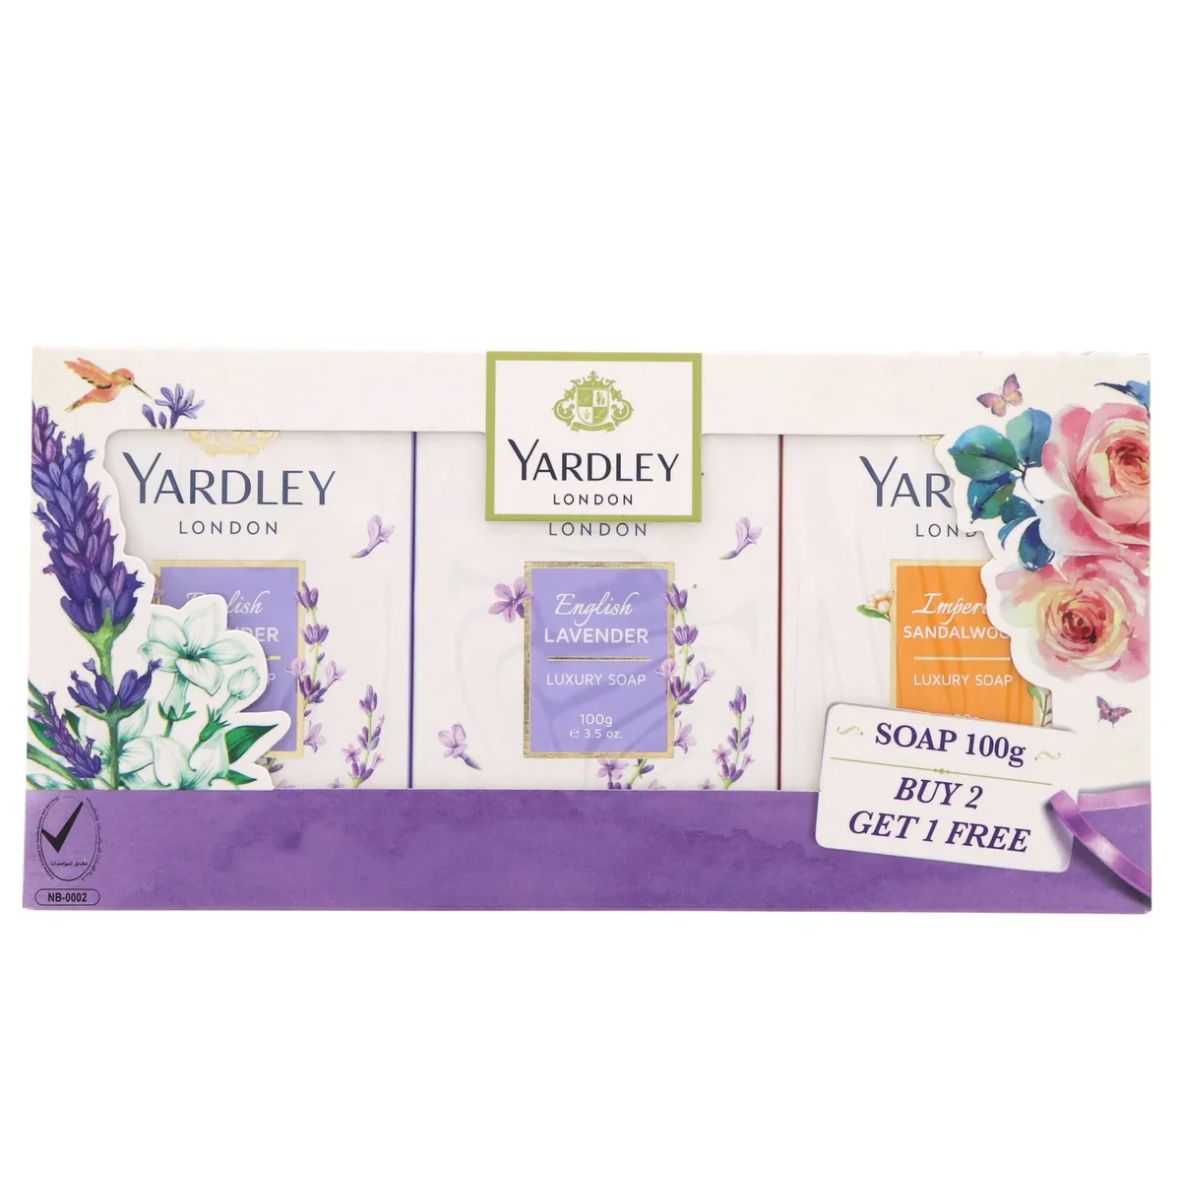 A pack of three Yardley - London Ladies Luxury Soaps with a 'buy 2 get 1 free' offer.